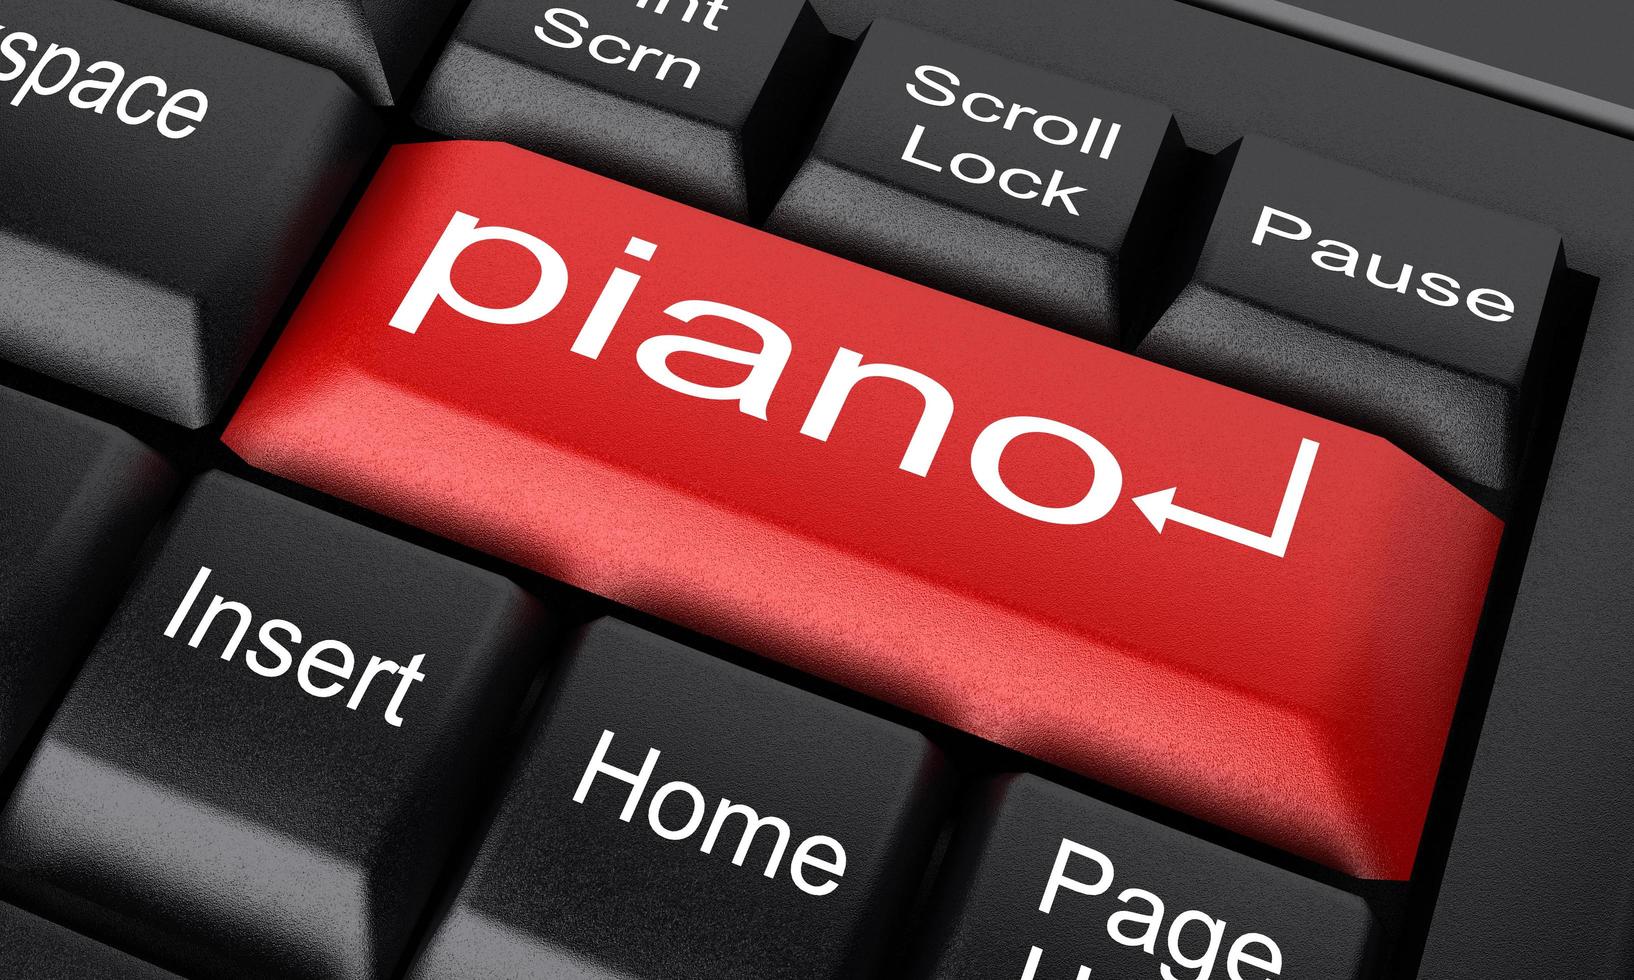 piano word on red keyboard button photo